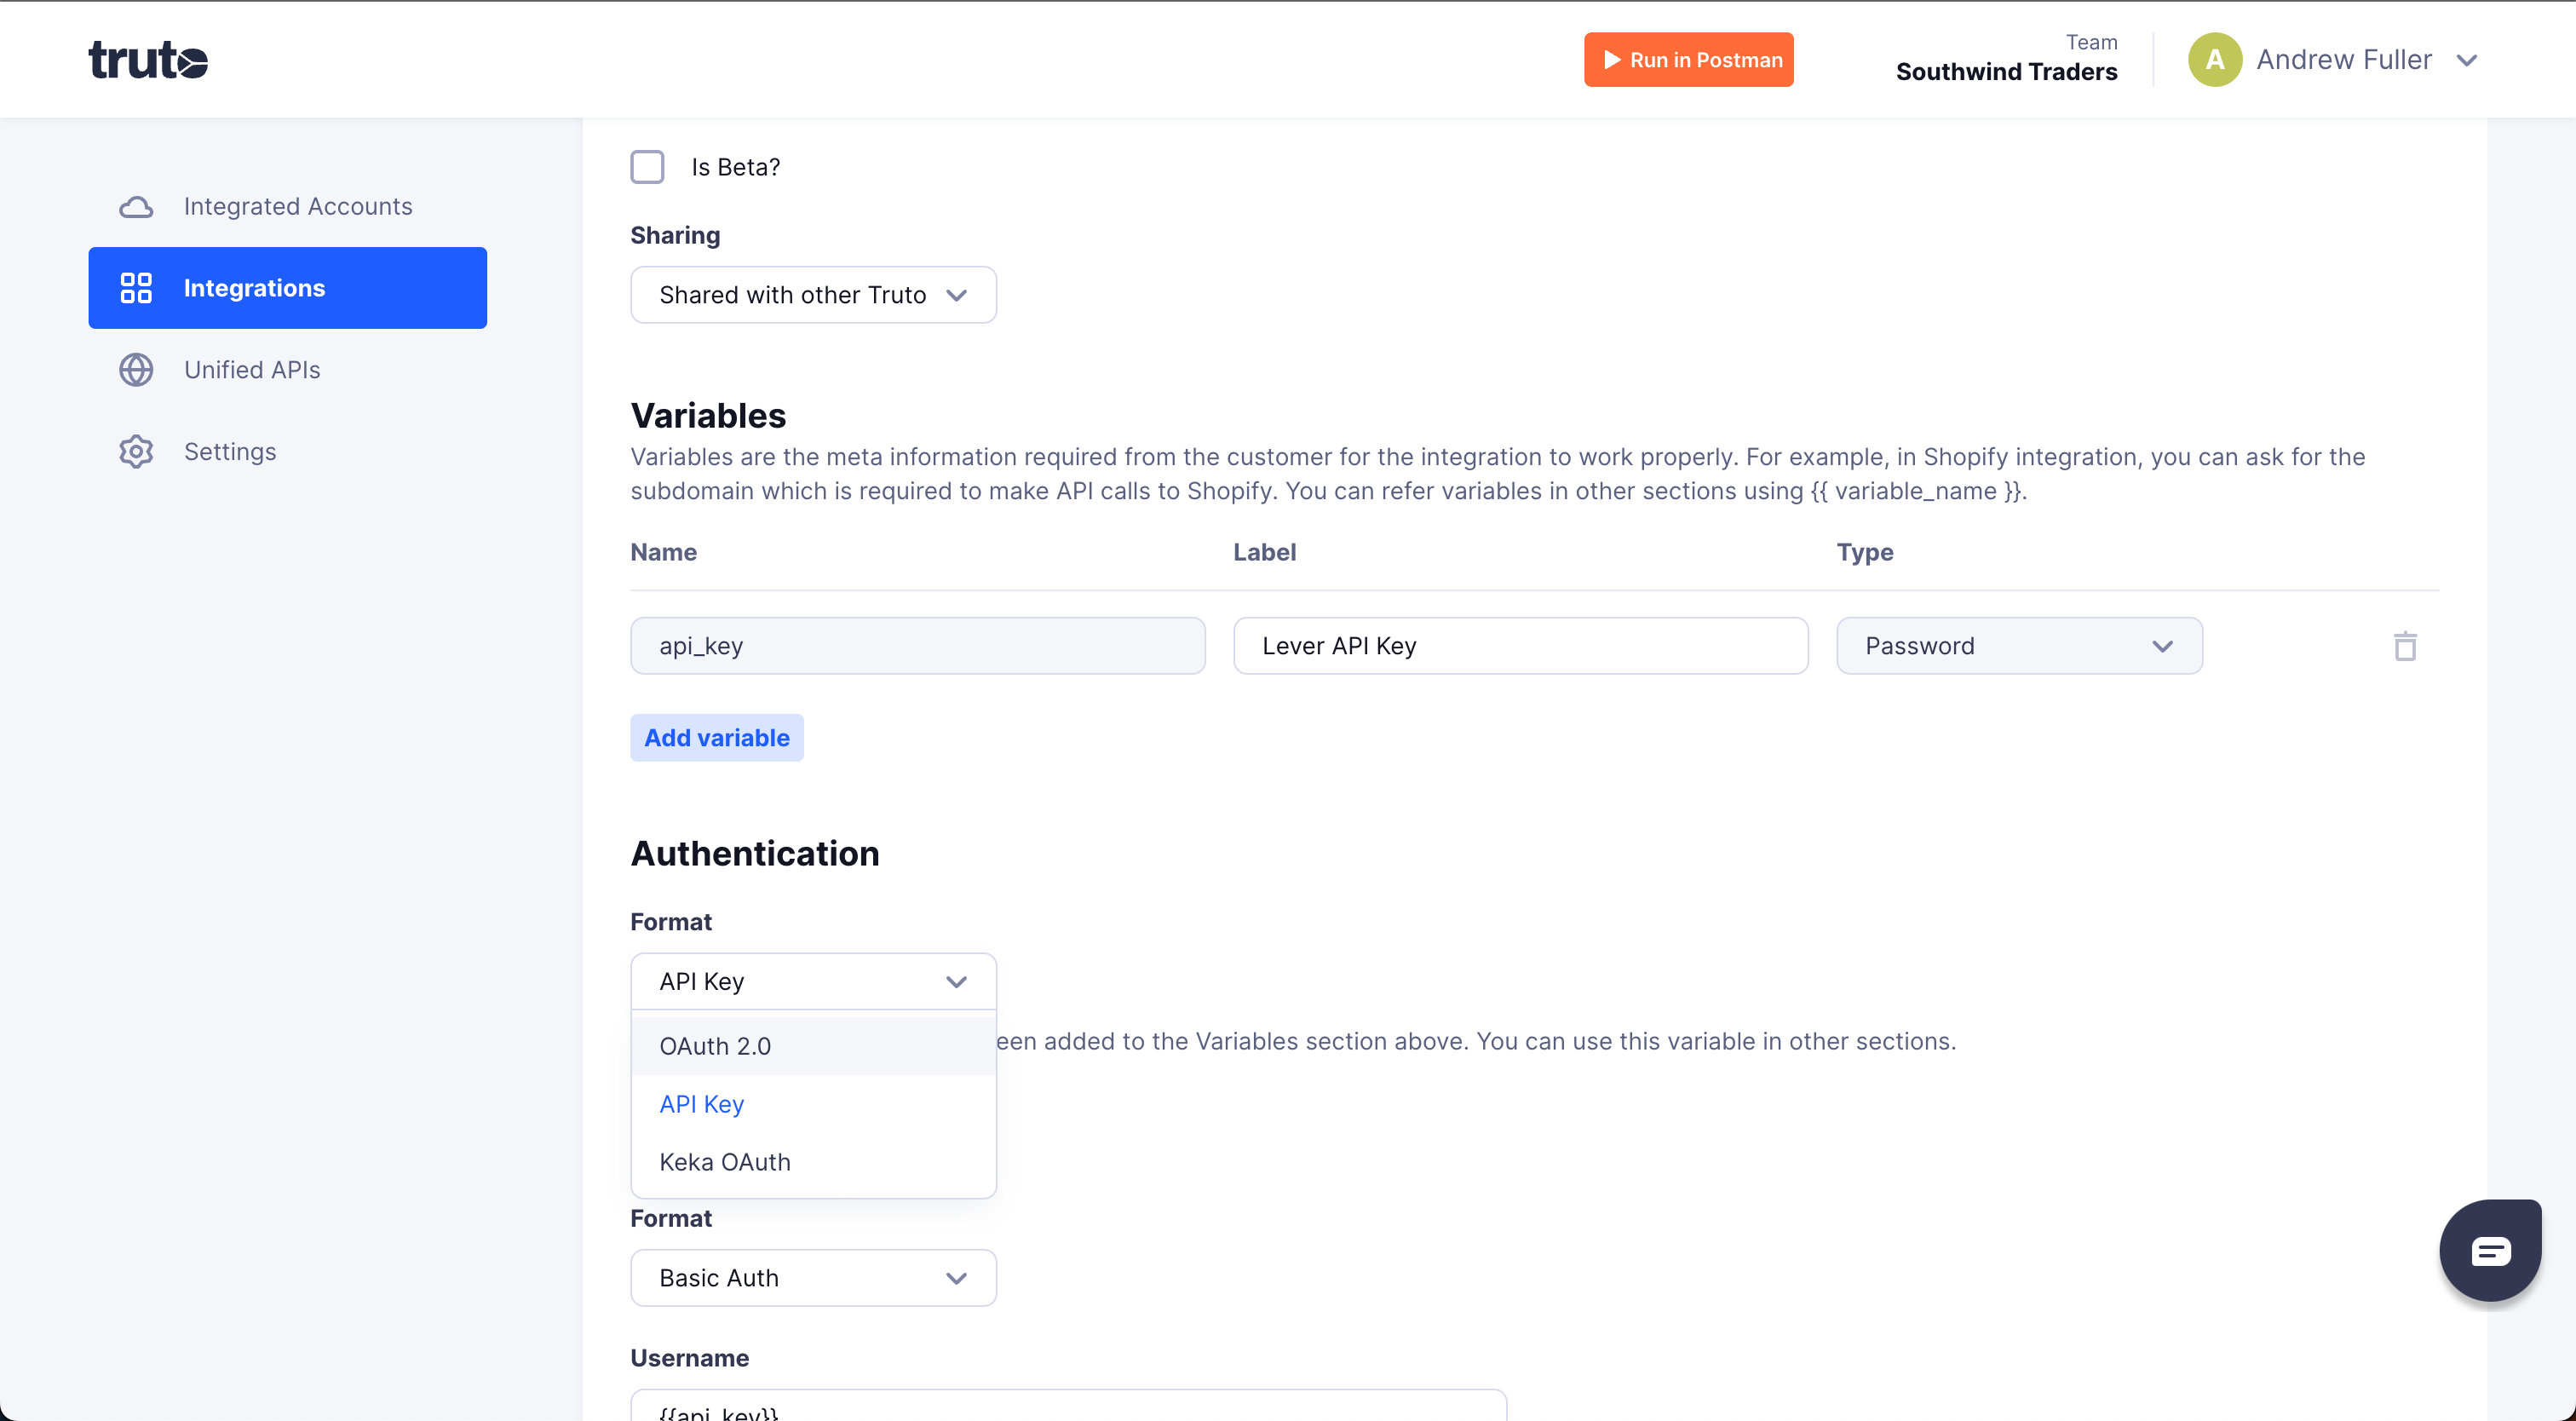 Select OAuth 2.0 in the authentication section